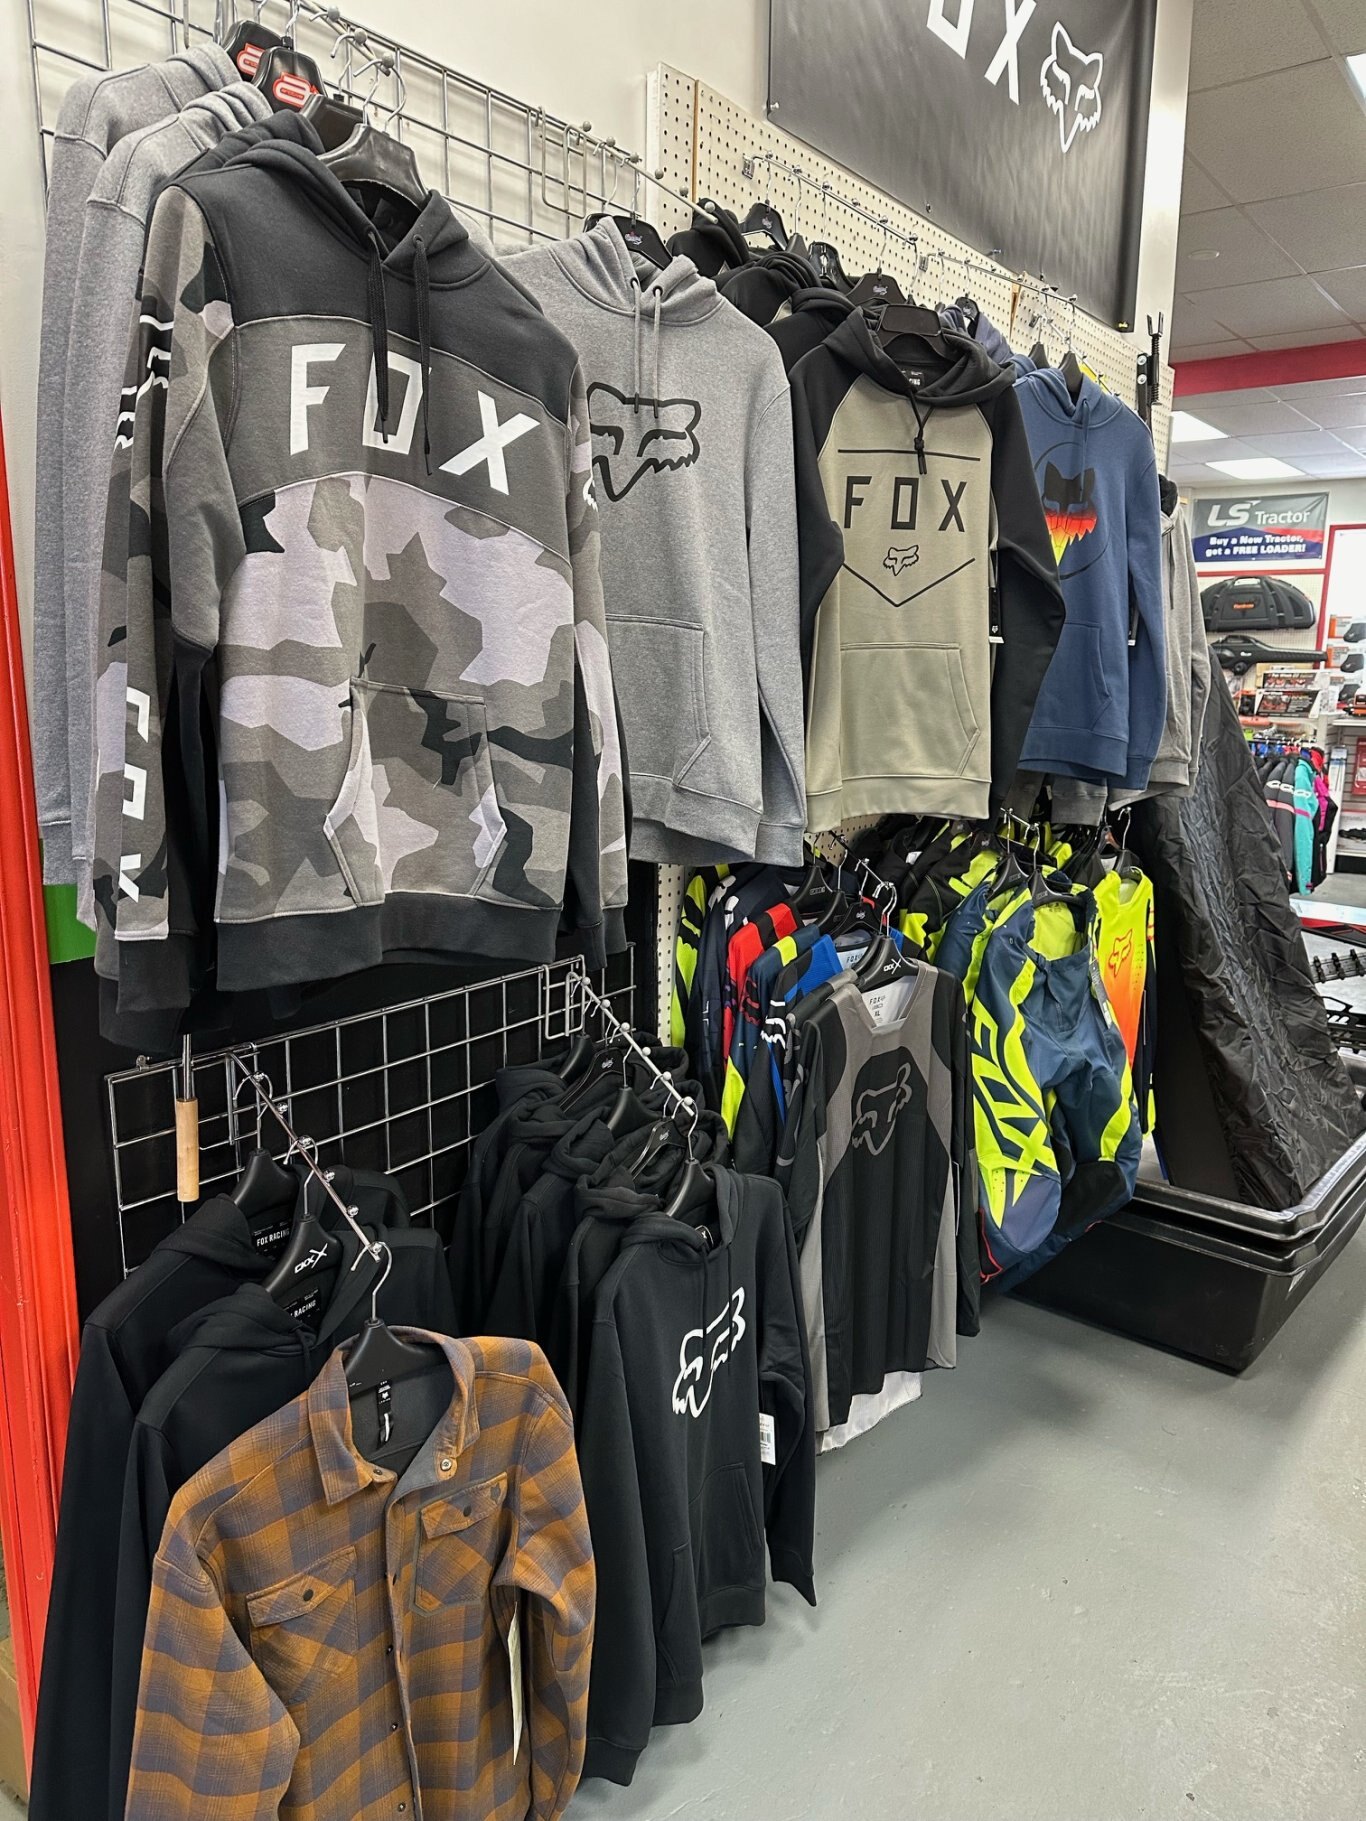 FOX CLOTHING ON SALE 20% OFF